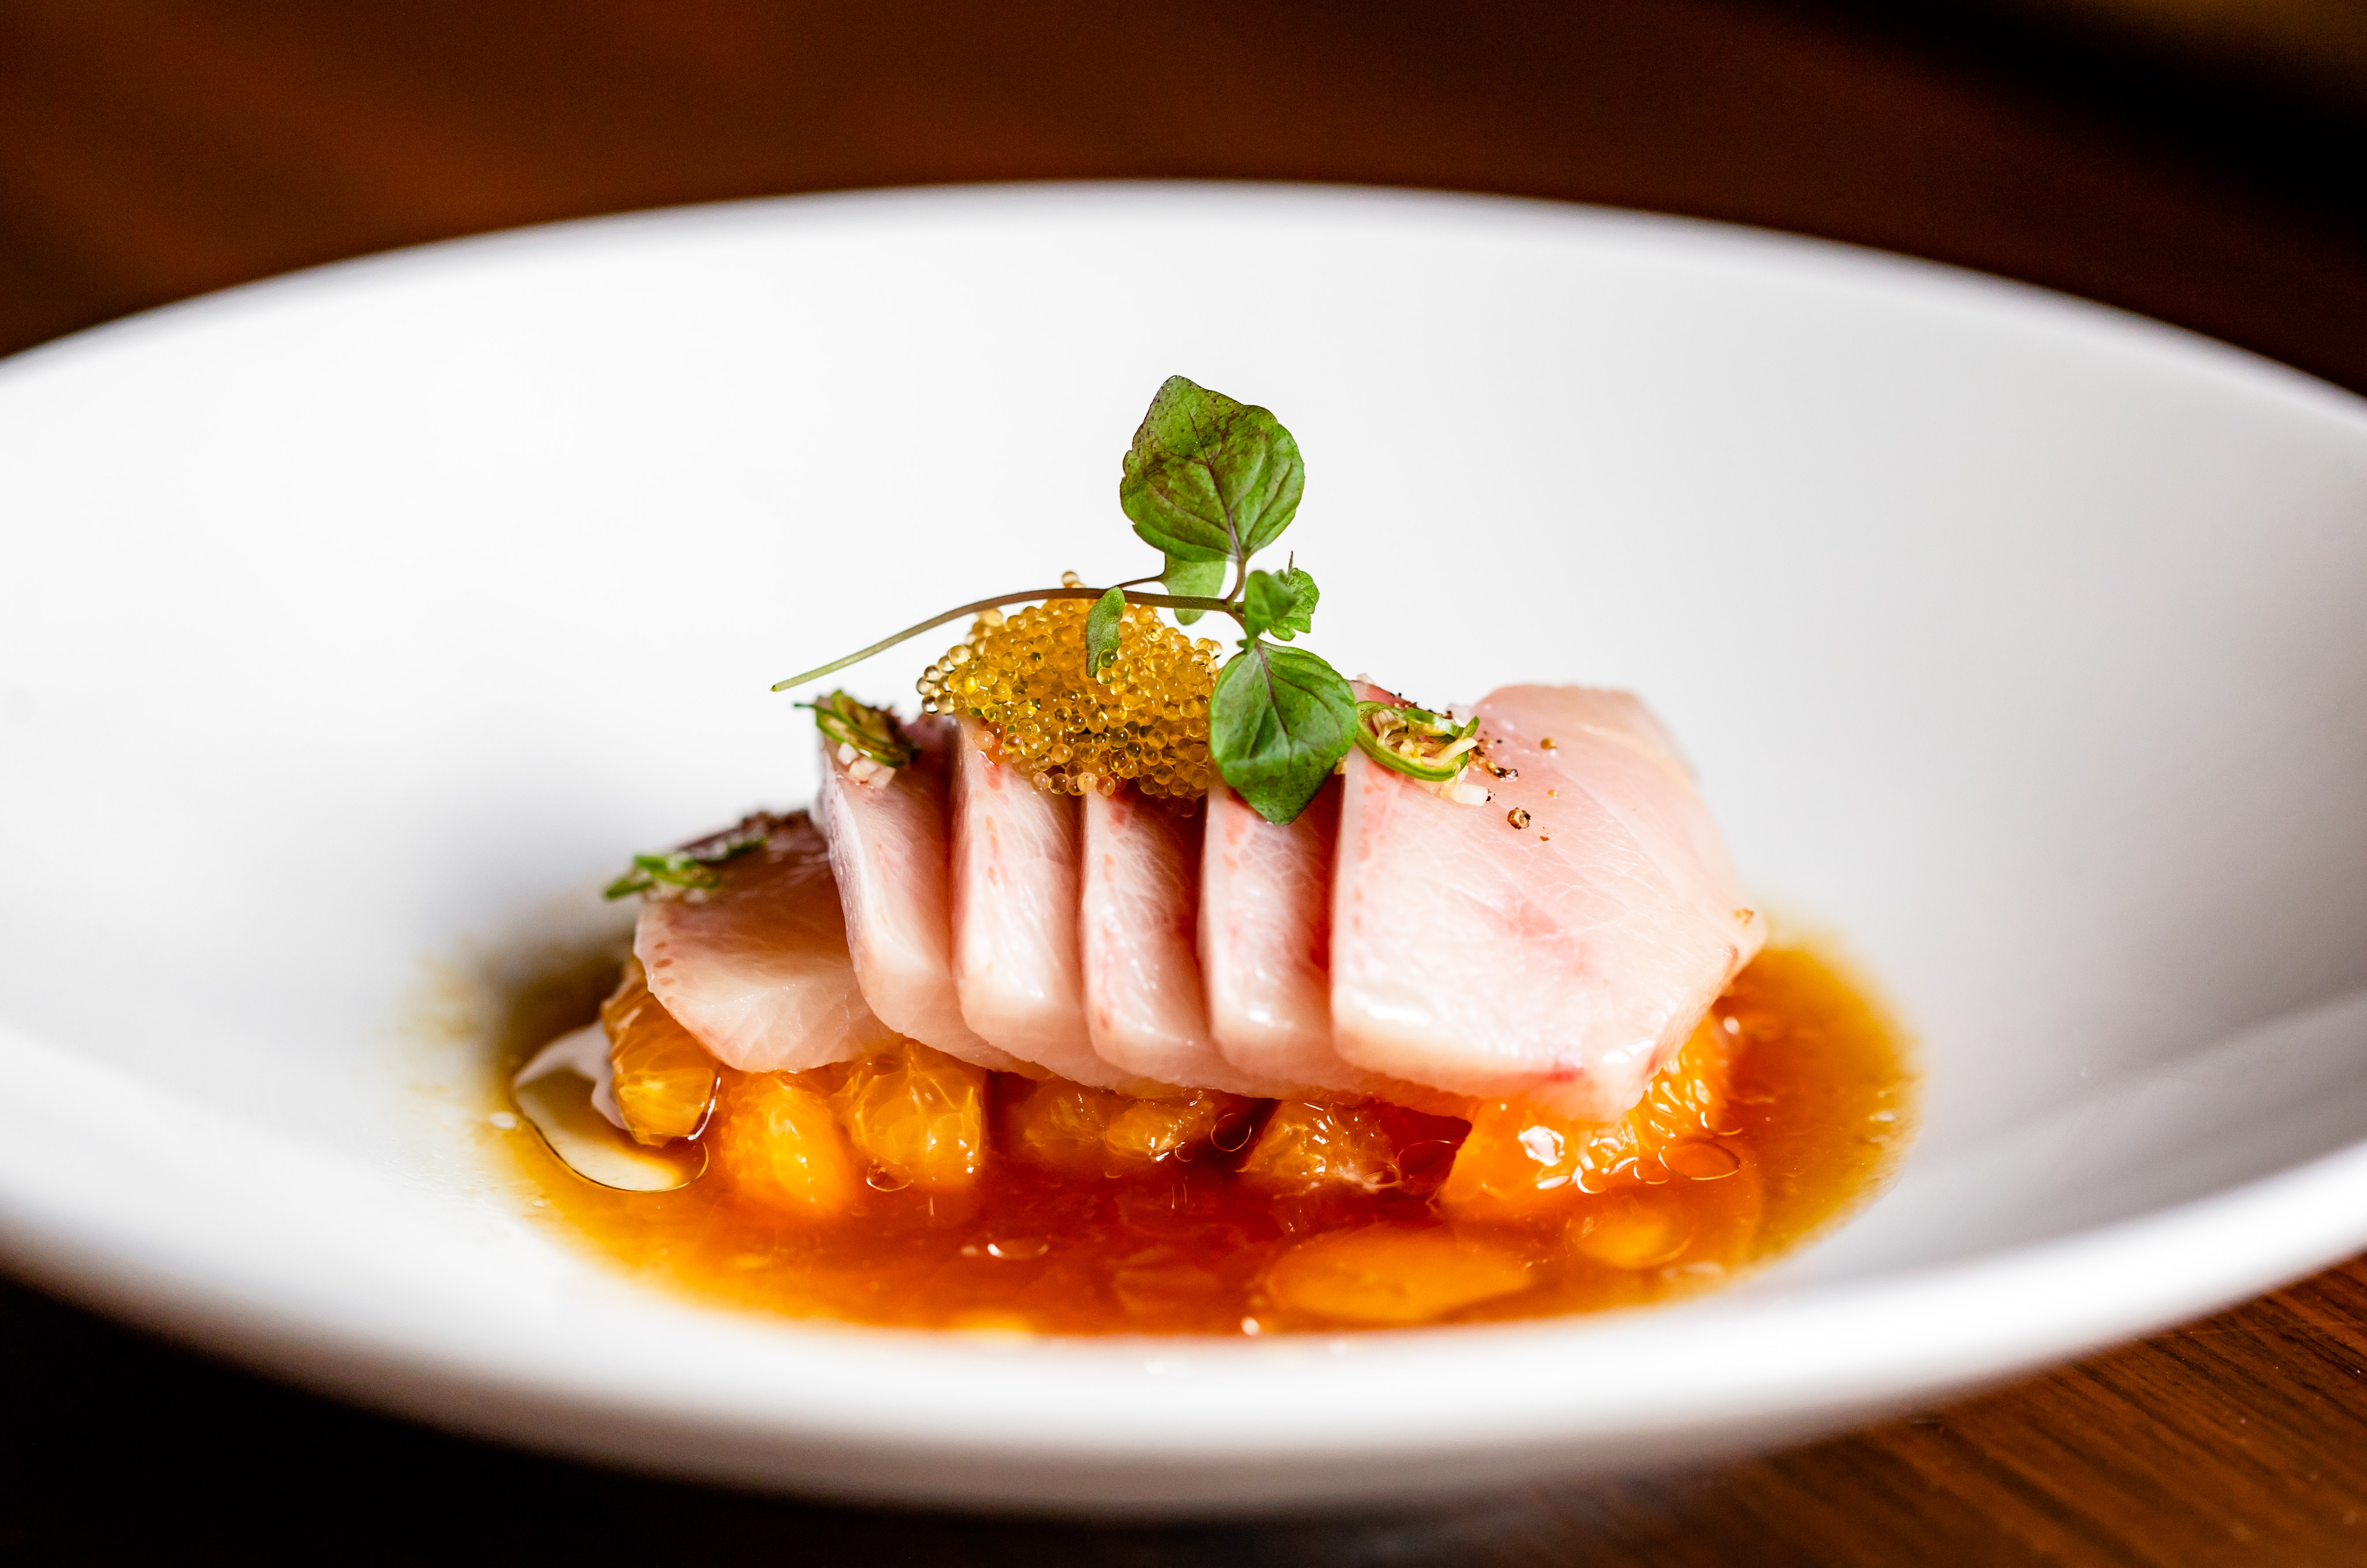 A dish from Uchi, the critically-acclaimed restaurant from Austin that’s heading for NYC.